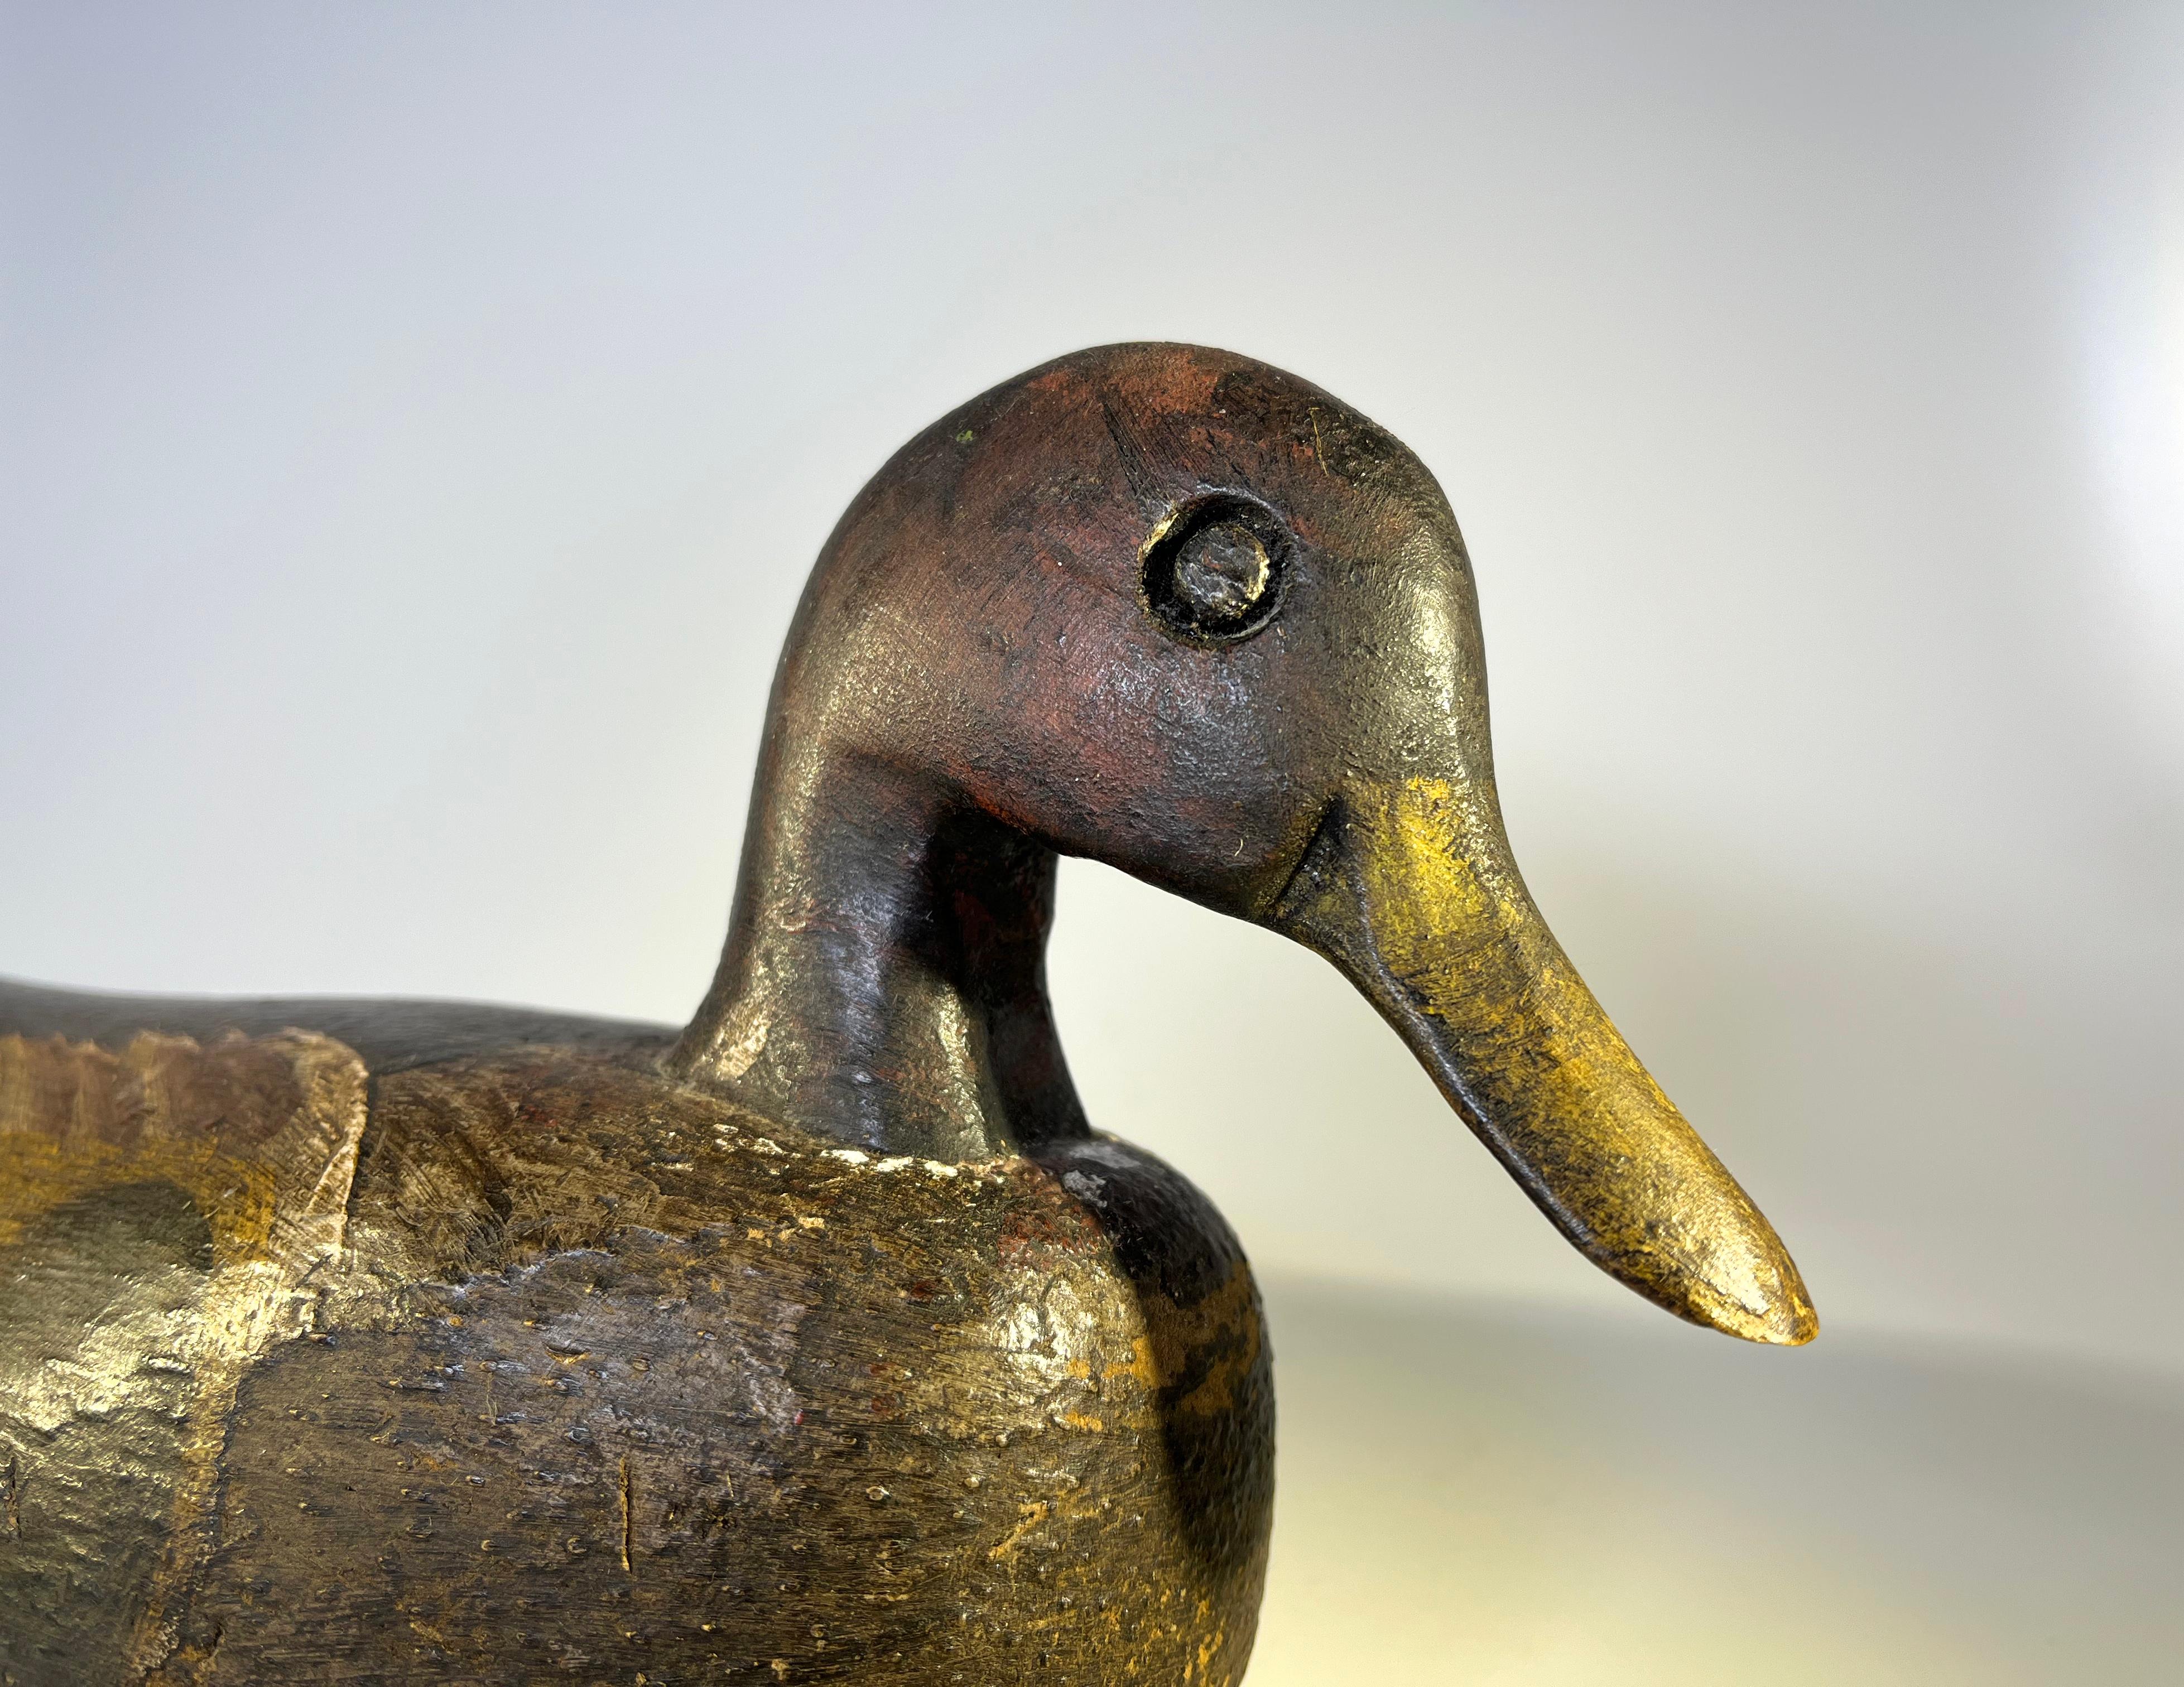 English Cork Waterfowl Decoy, Hand Crafted Painted Antique, Early 20th Century In Good Condition For Sale In Rothley, Leicestershire